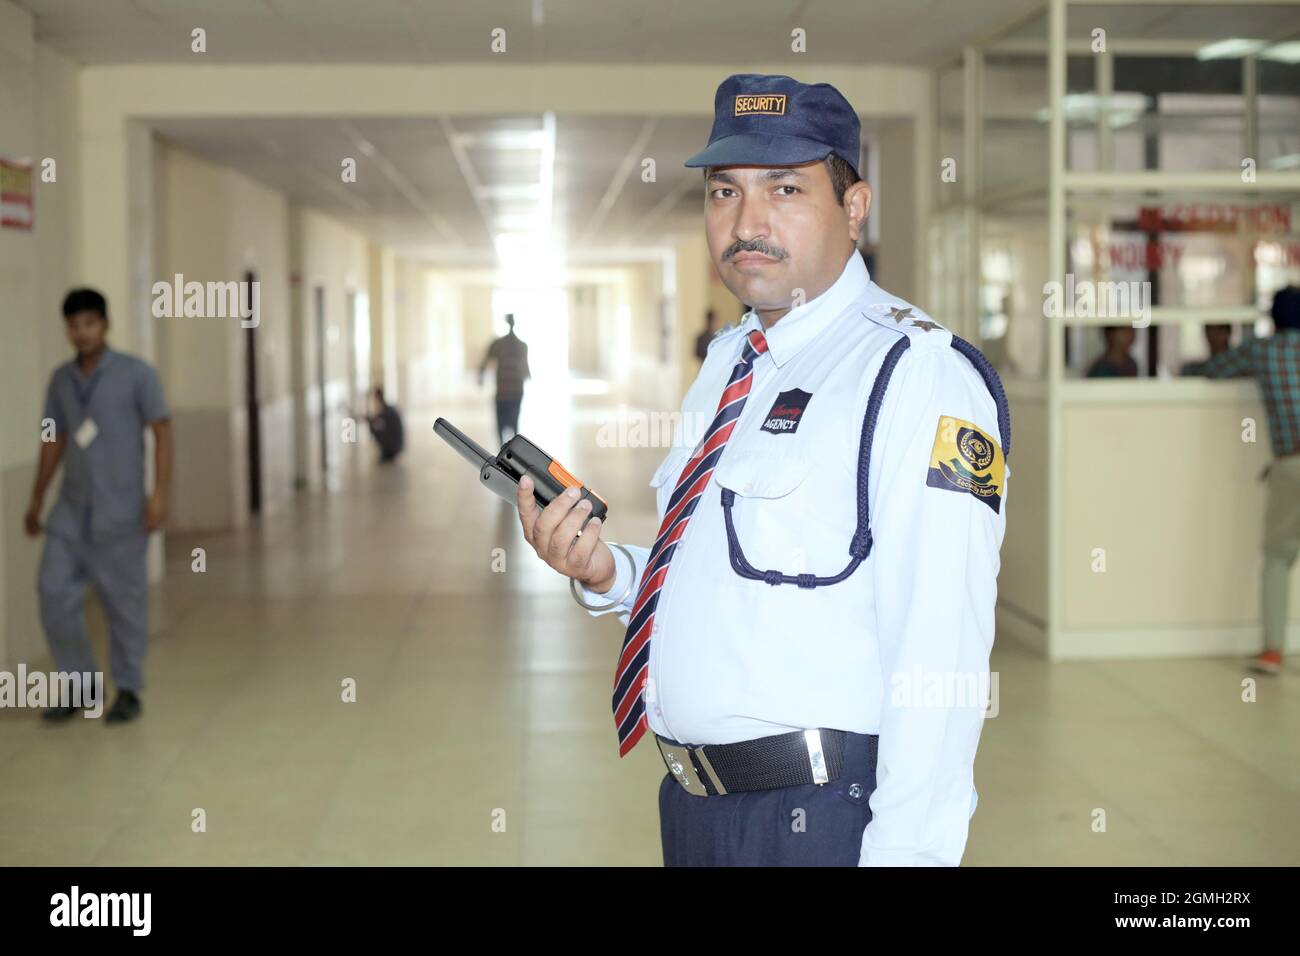 Security Officer in a hospital on duty with walkie talkie in hand in blue dress with cap Stock Photo